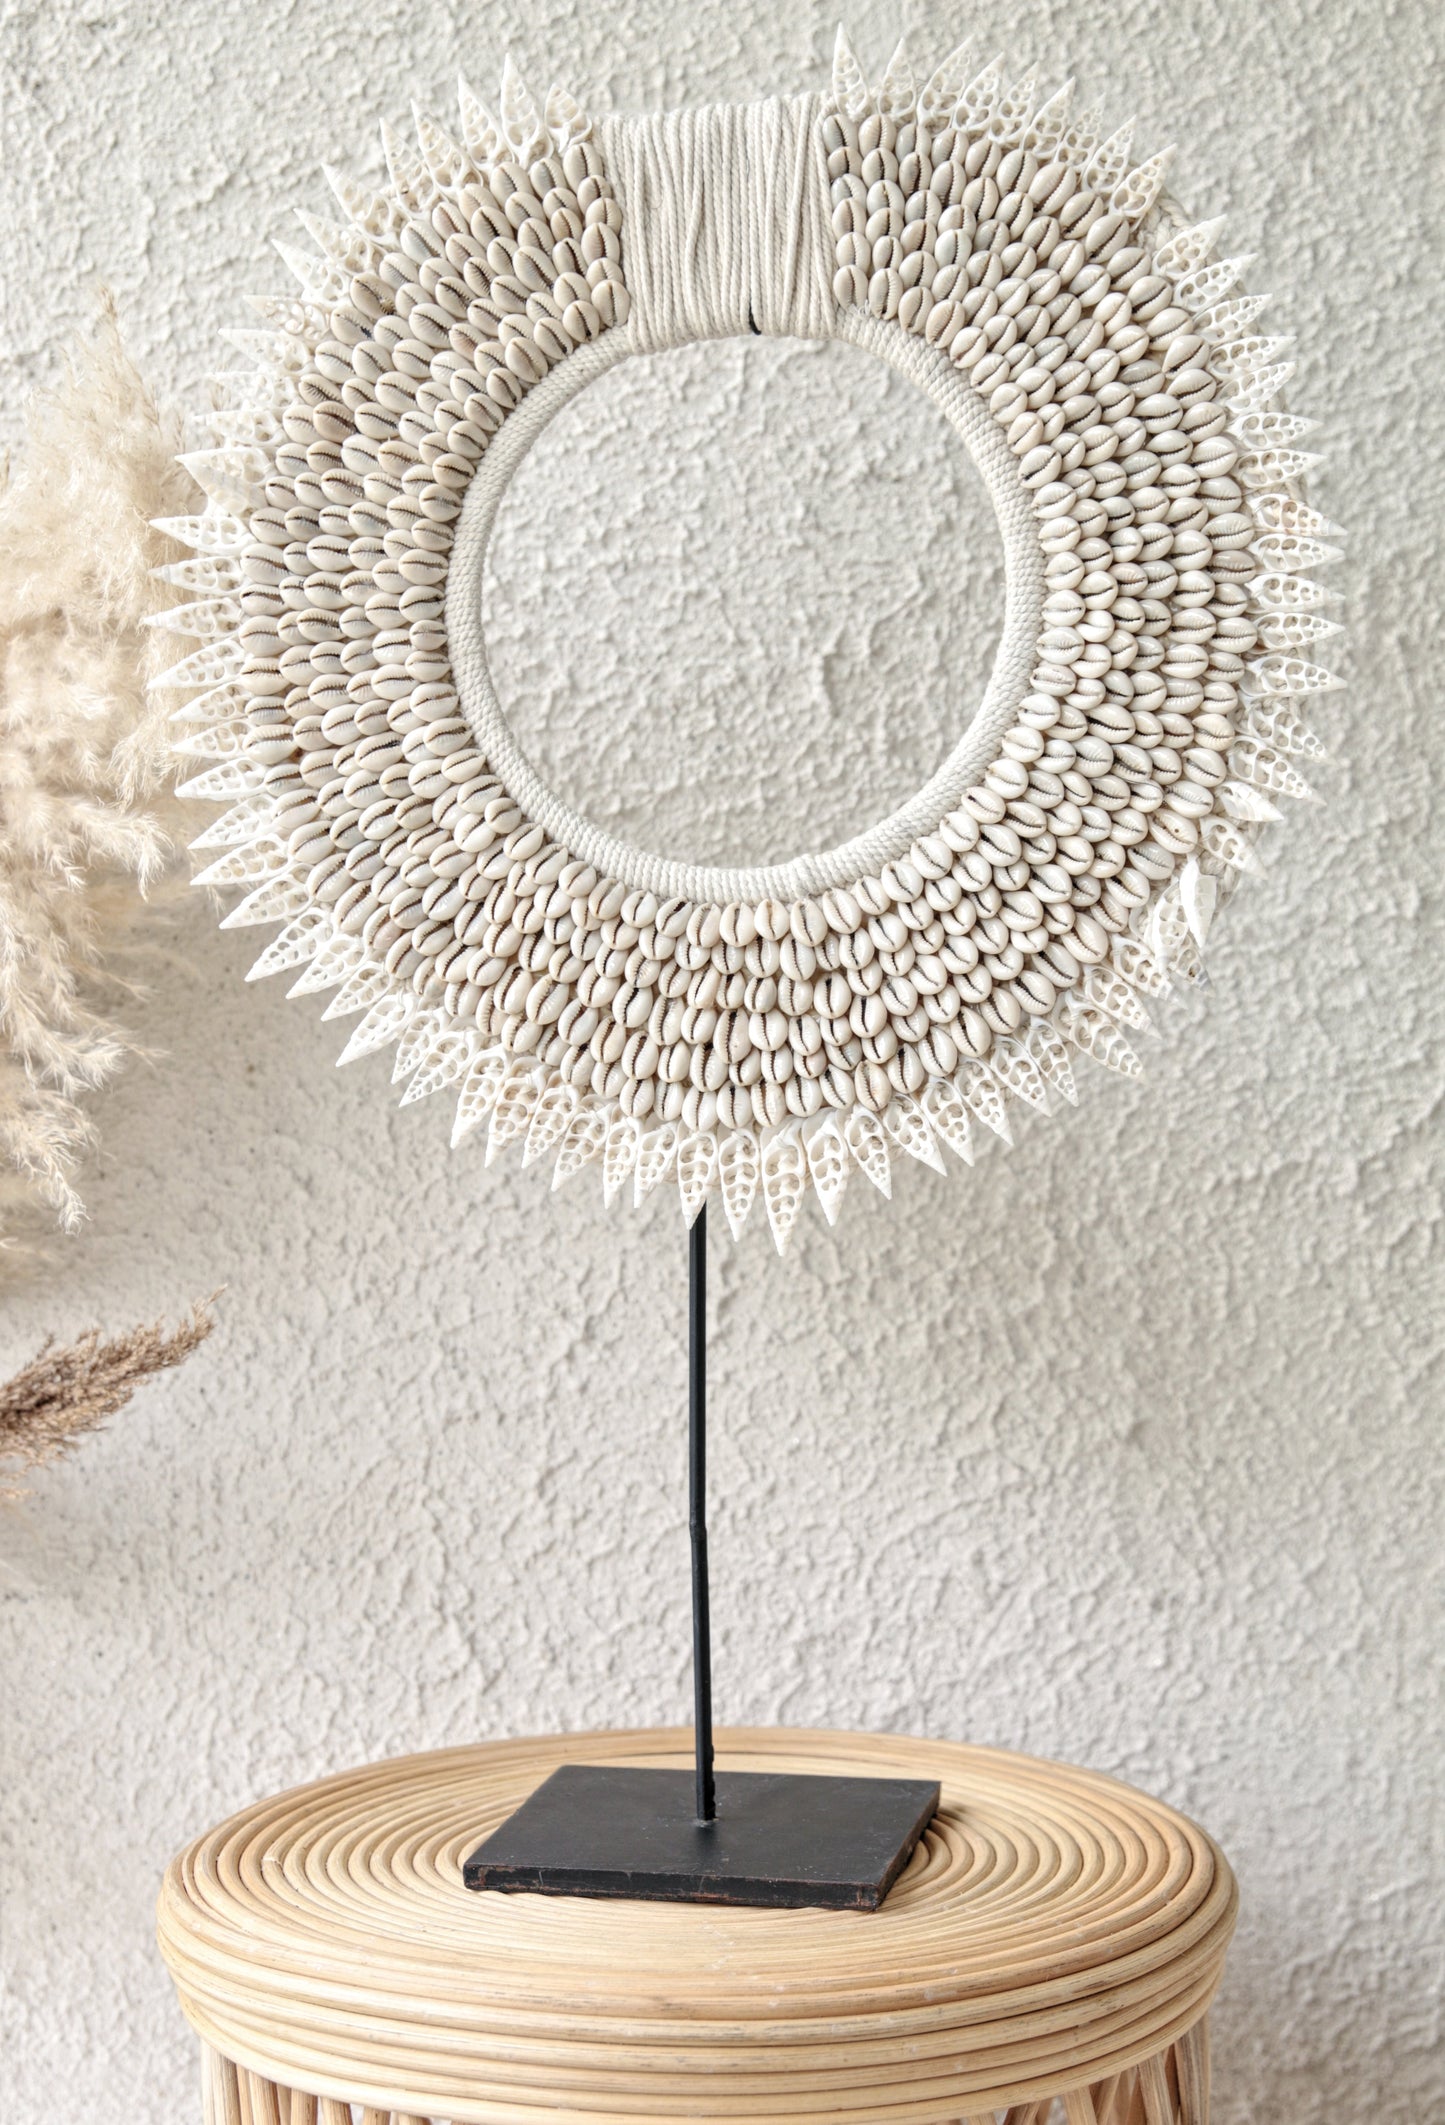 ROUND SHELL NECKLACE DECOR